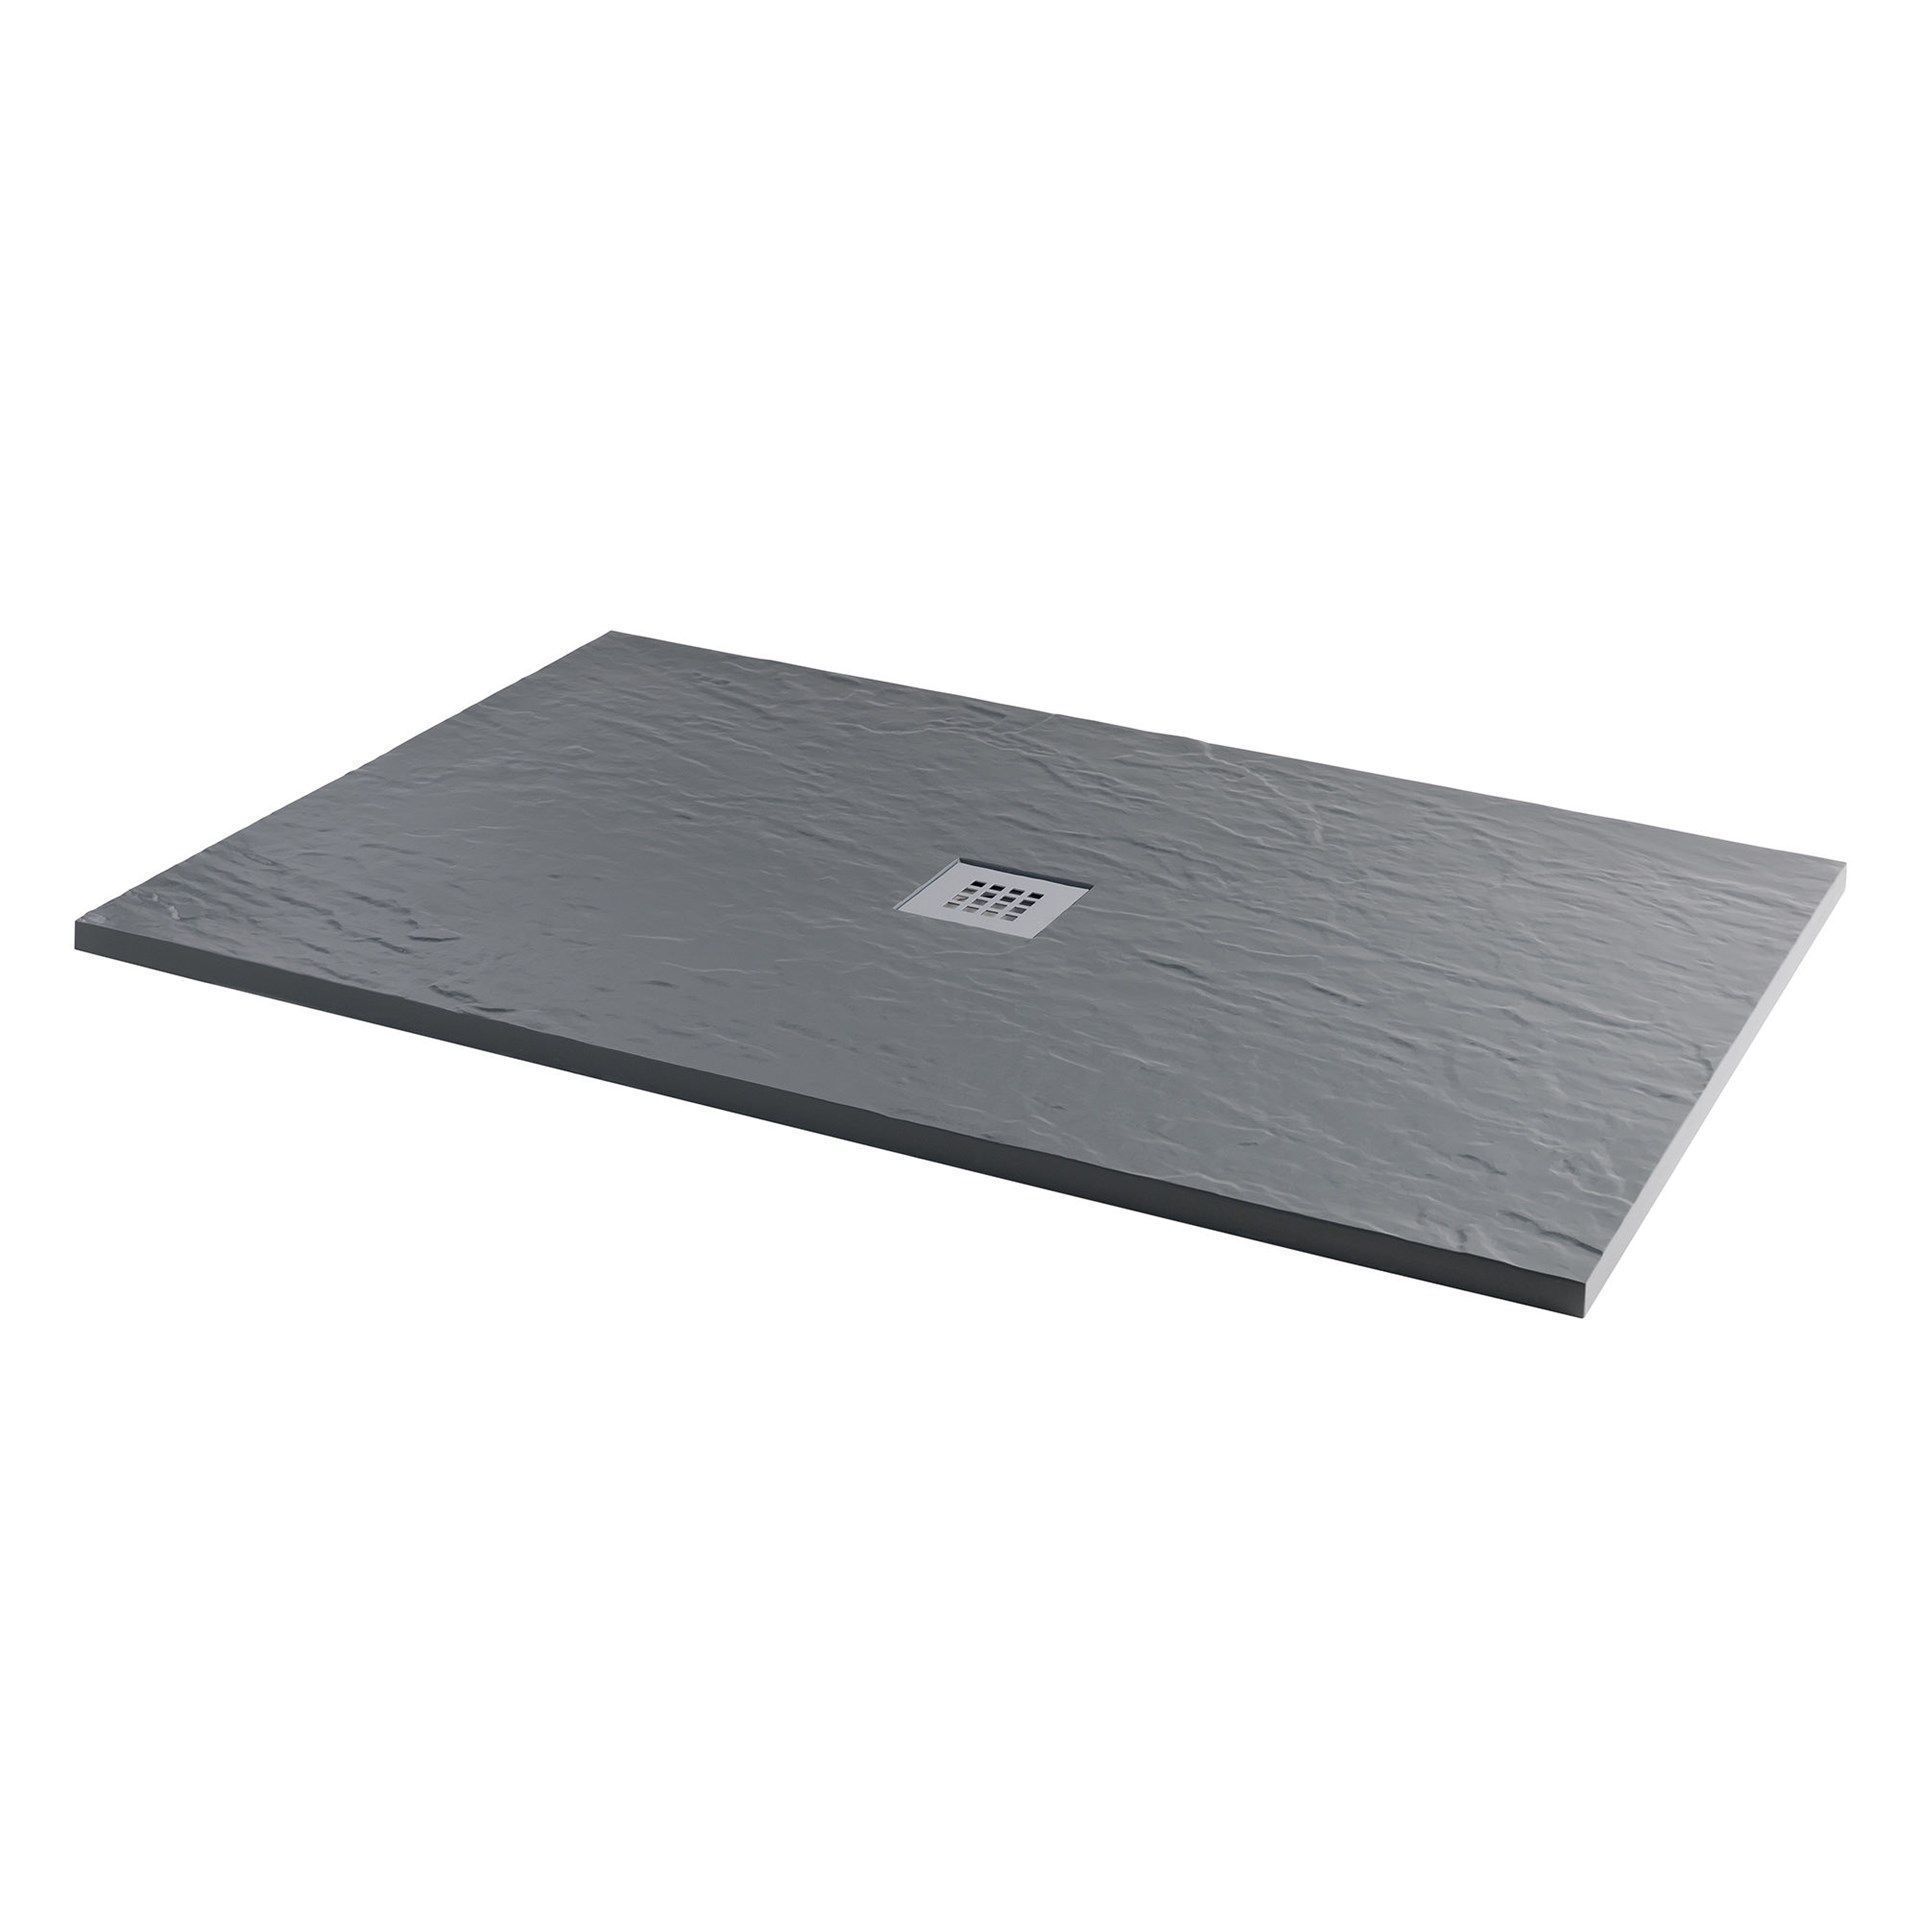 NEW 1200x800mm Rectangular Slate Effect Shower Tray in Grey. Manufactured in the UK from high ... - Image 2 of 2